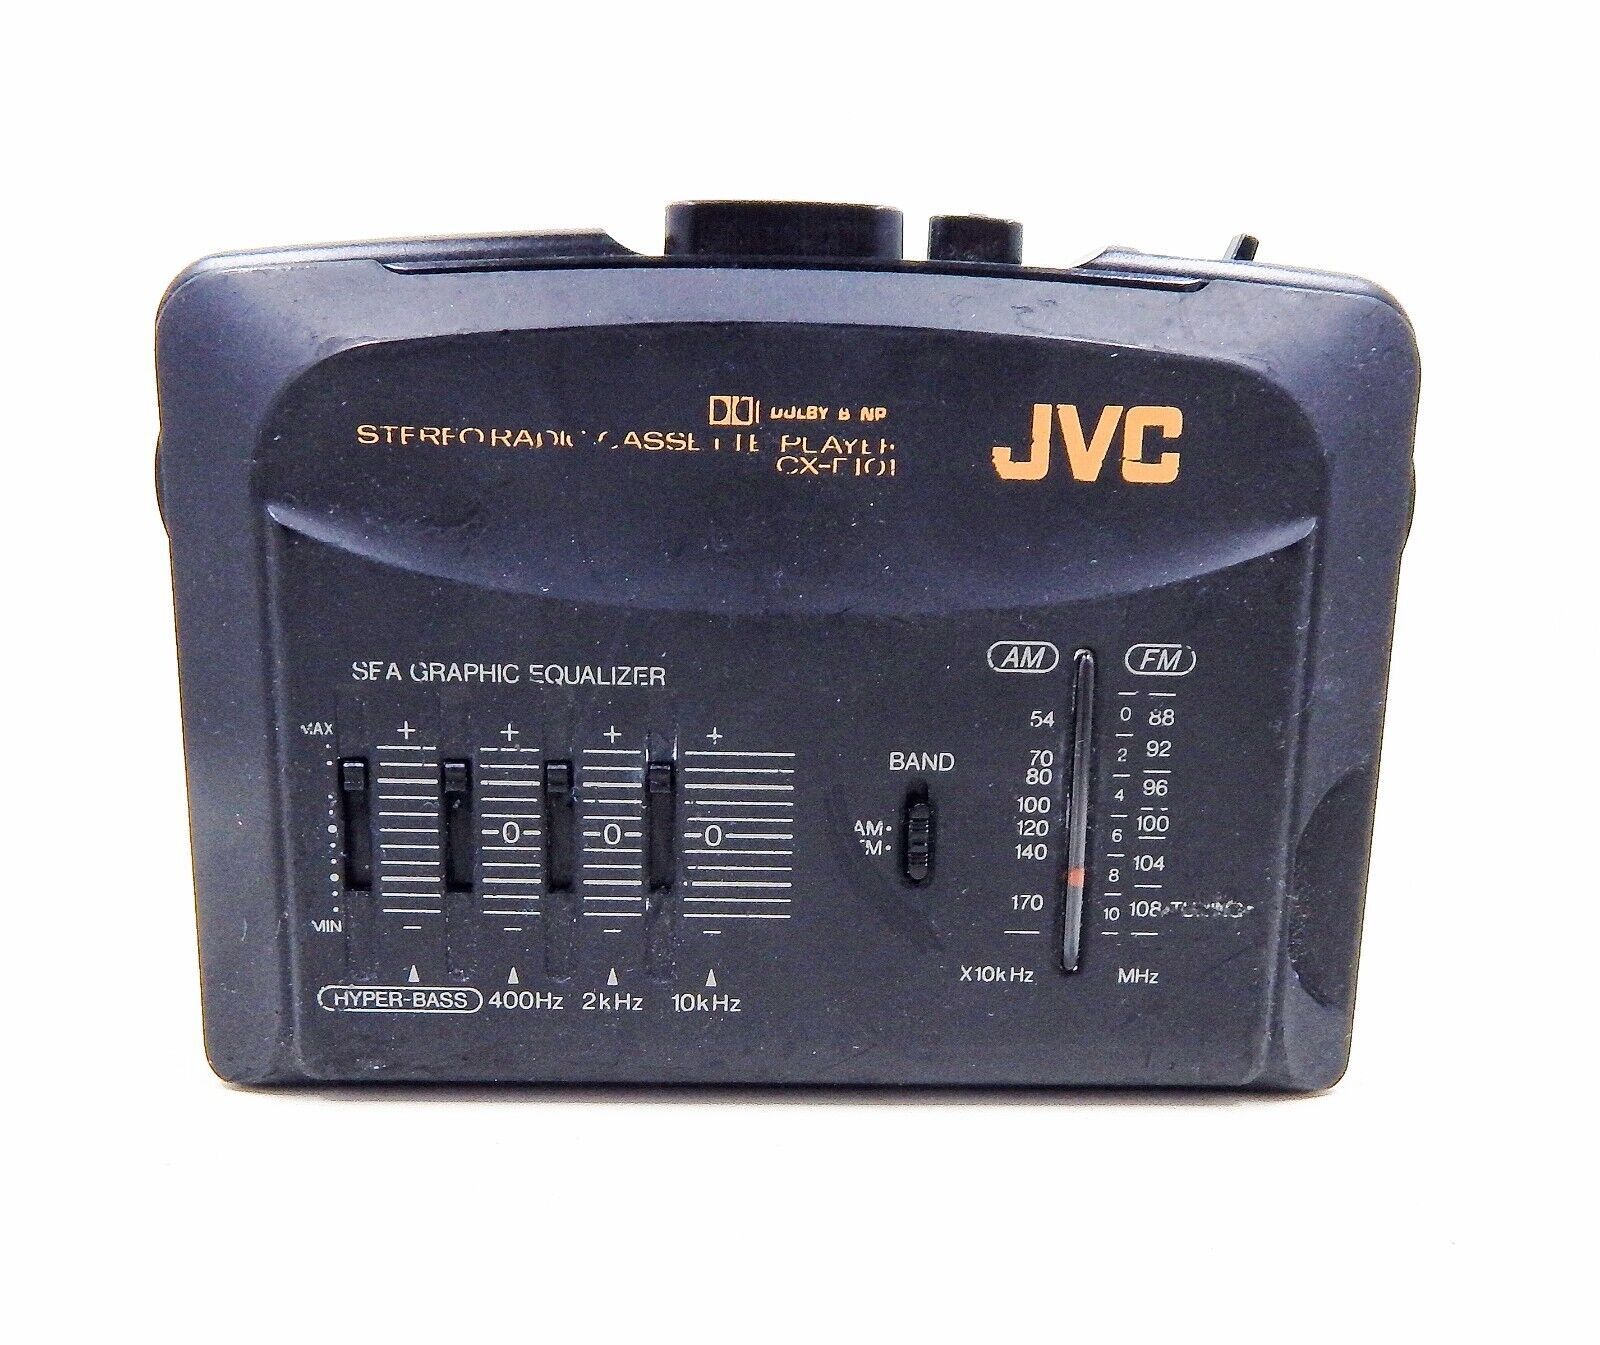 JVC CX-F101 Hyper-Bass Stereo Portable Radio Cassette Player Tested Working - $129.99